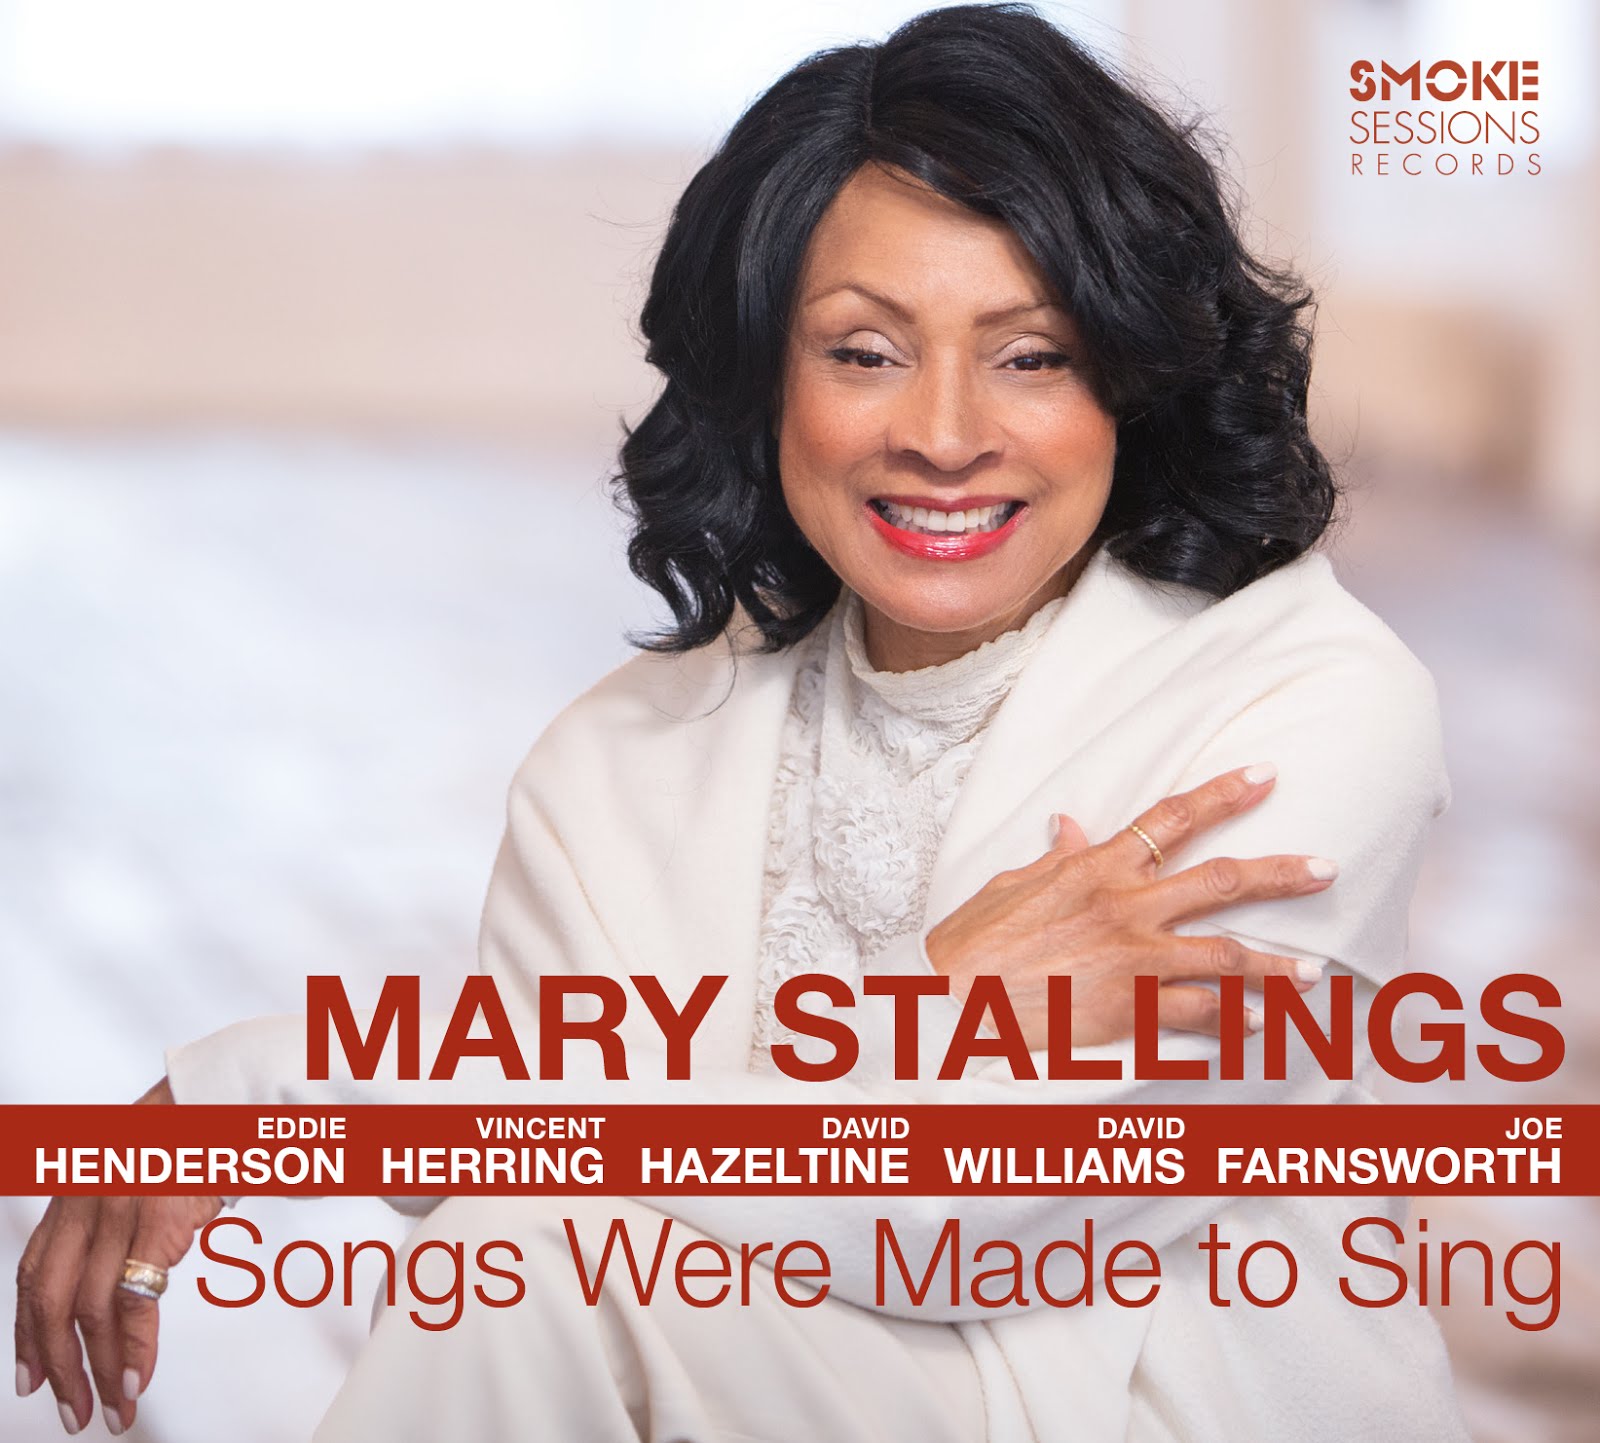 MARY STALLINGS: SONGS WERE MADE TO SING